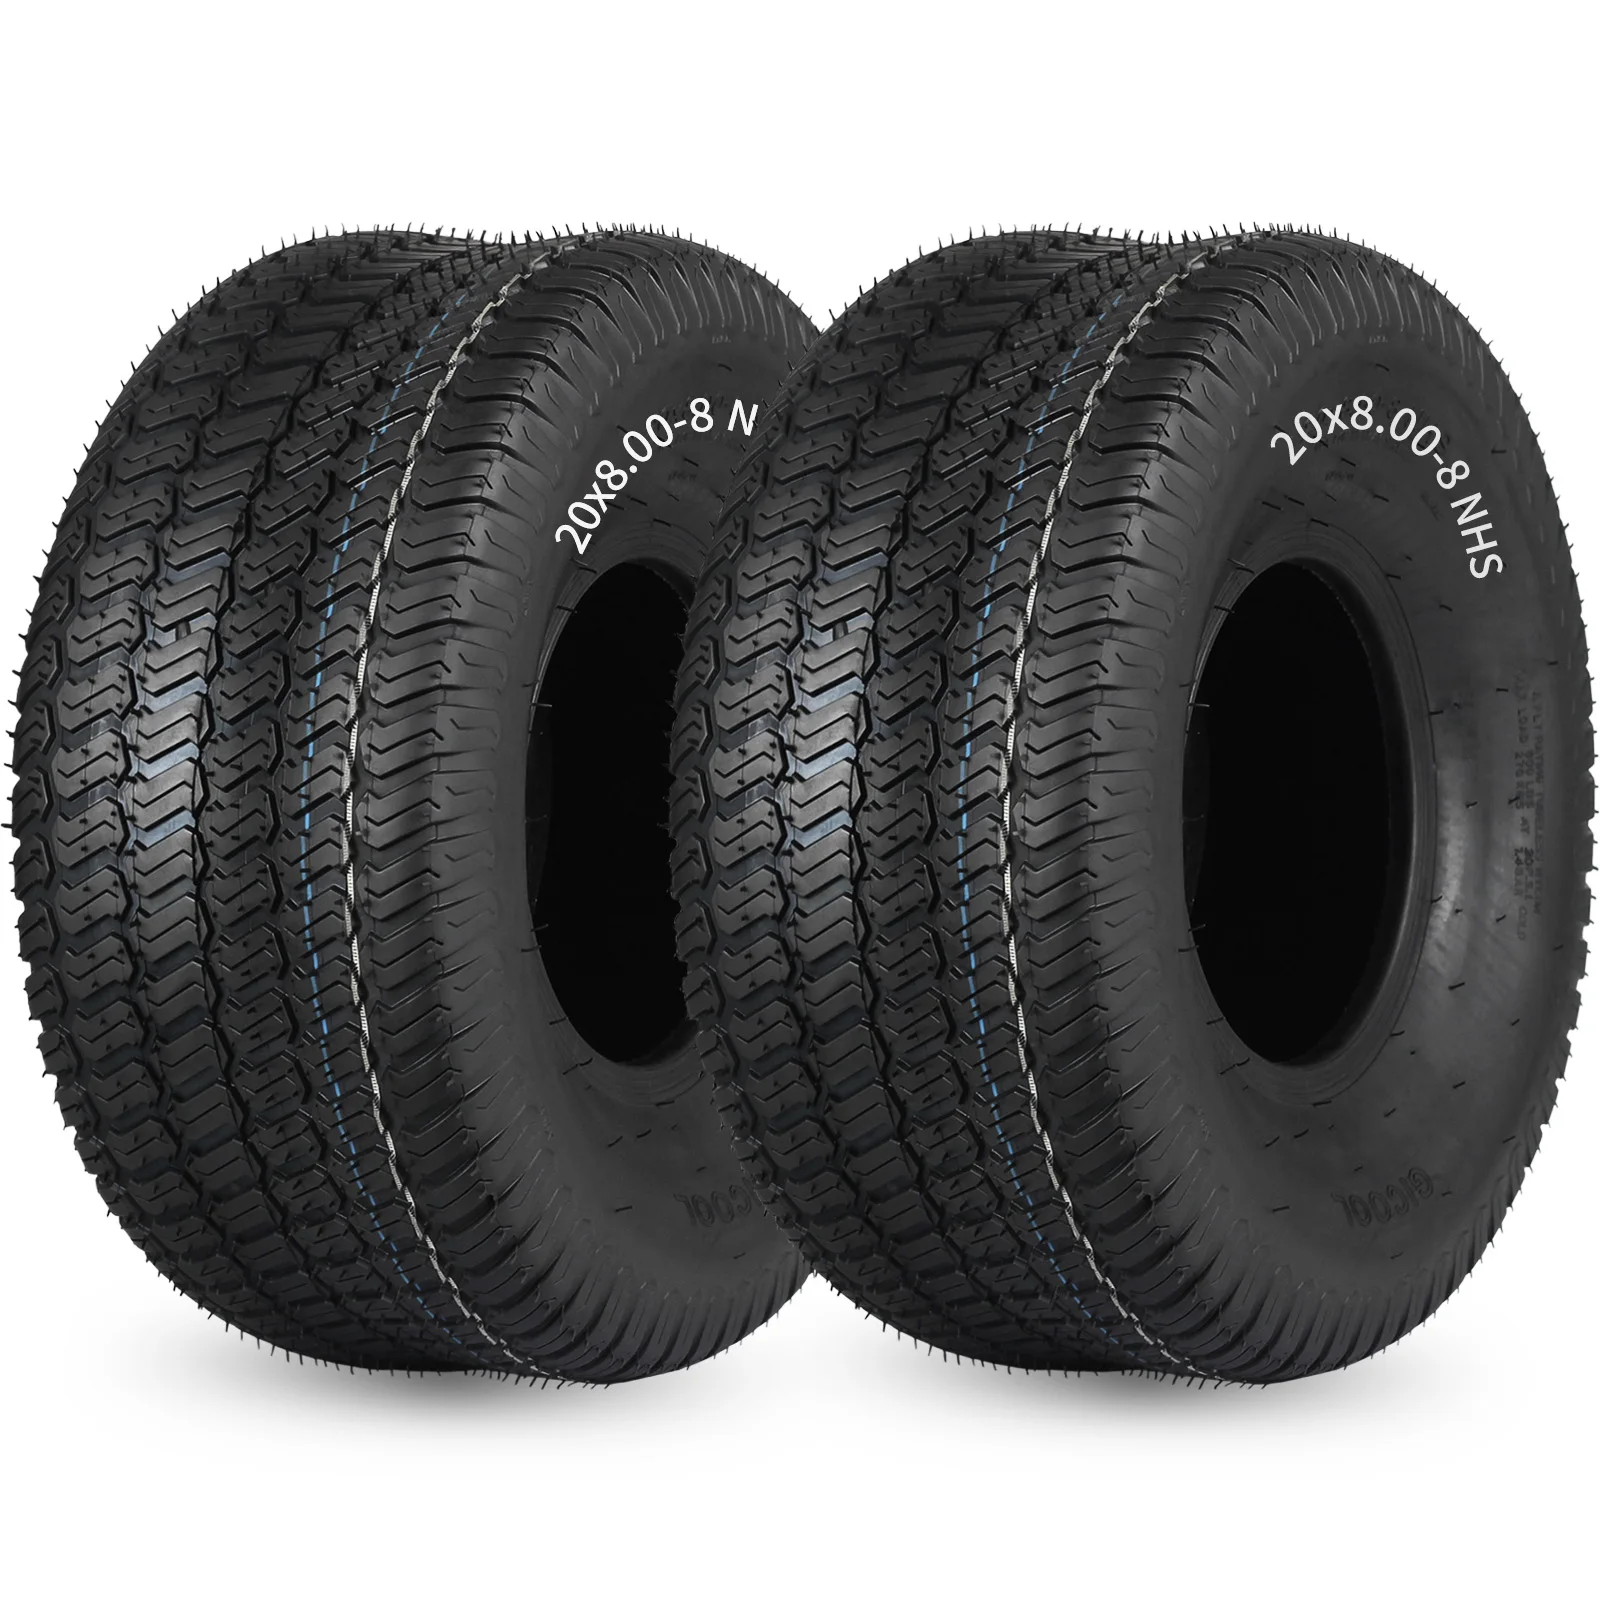 20 x 8.00-8 Turf-S Pattern Lawnmower Tubeless Turf Tire, 20x8-8 for Tractor Riding Lawnmowers, 4 Ply